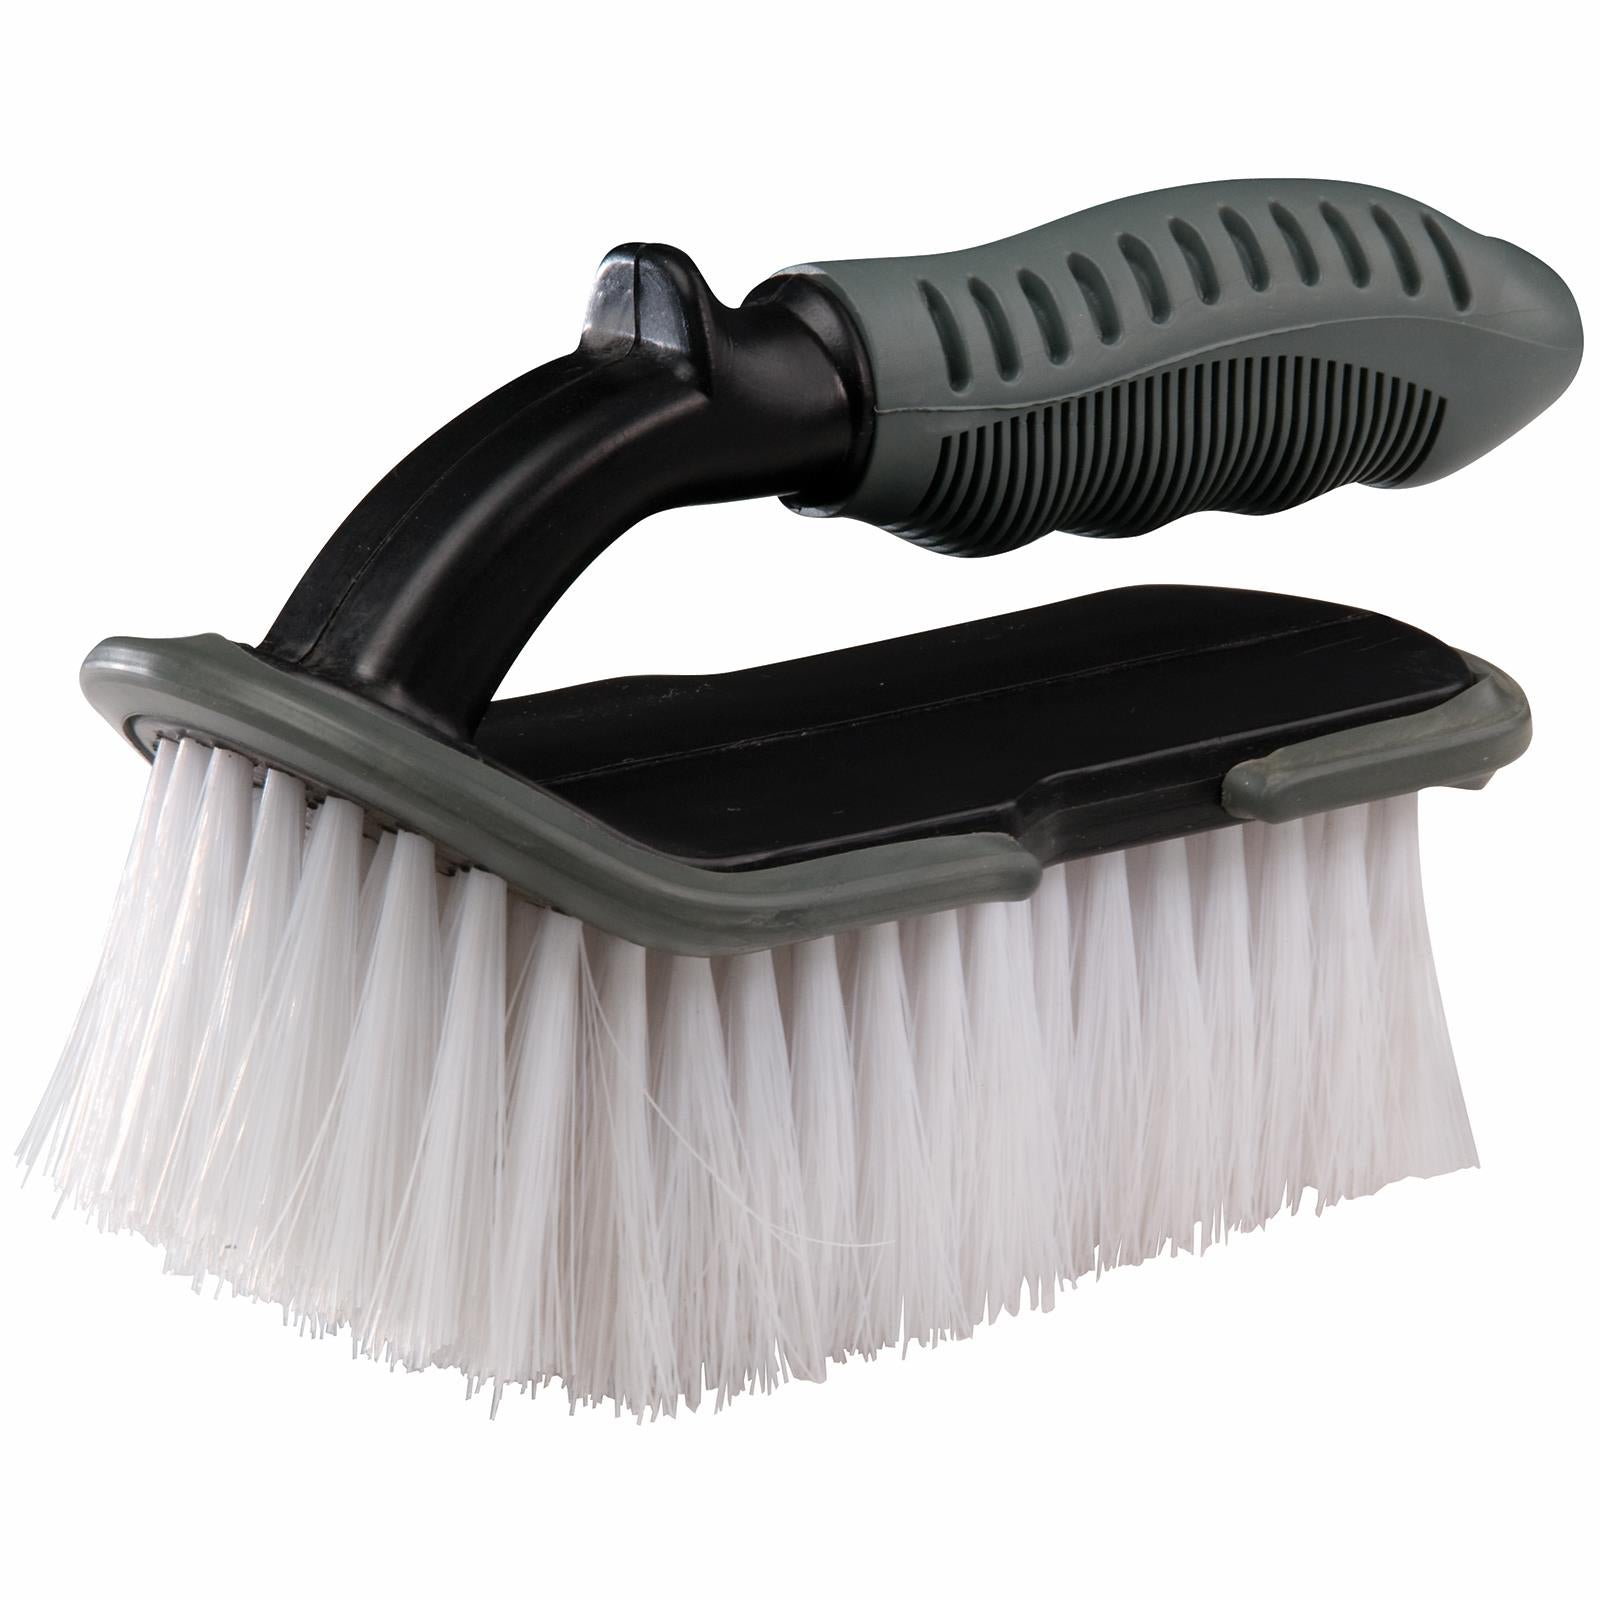 Silverline Soft Wash Car Cleaning Brush 150mm